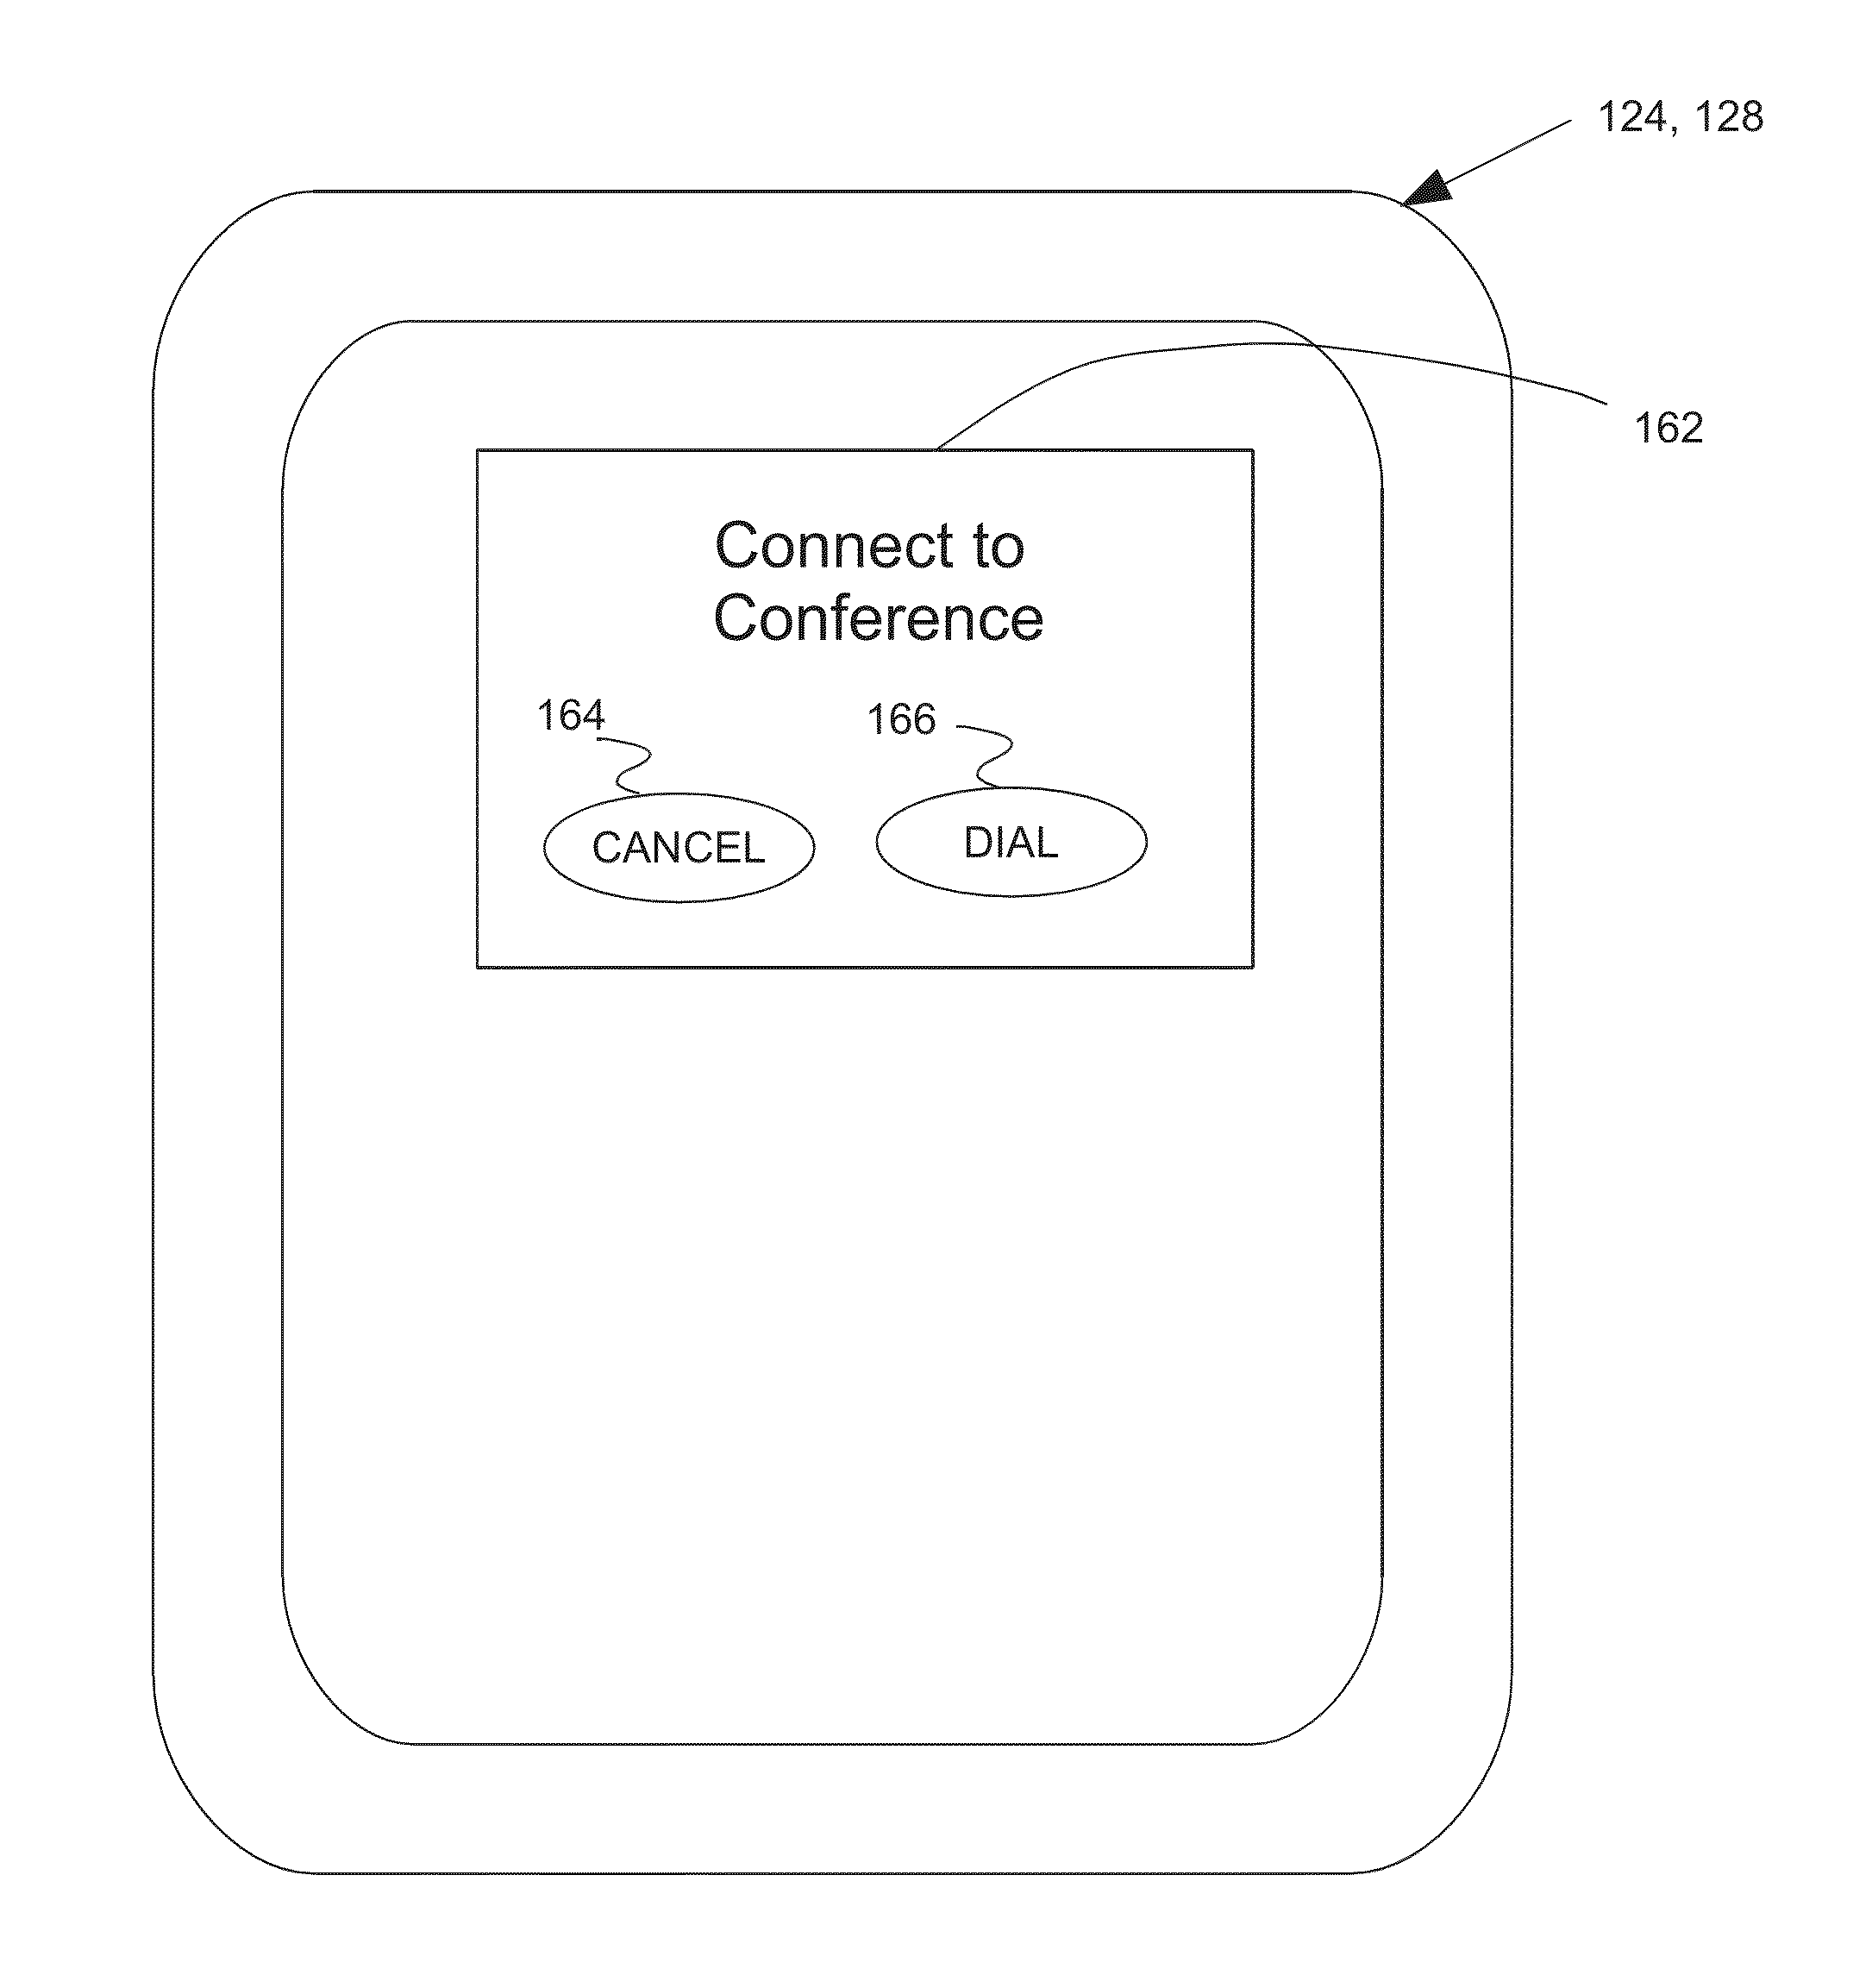 System and Method of Routing Conference Call Participants